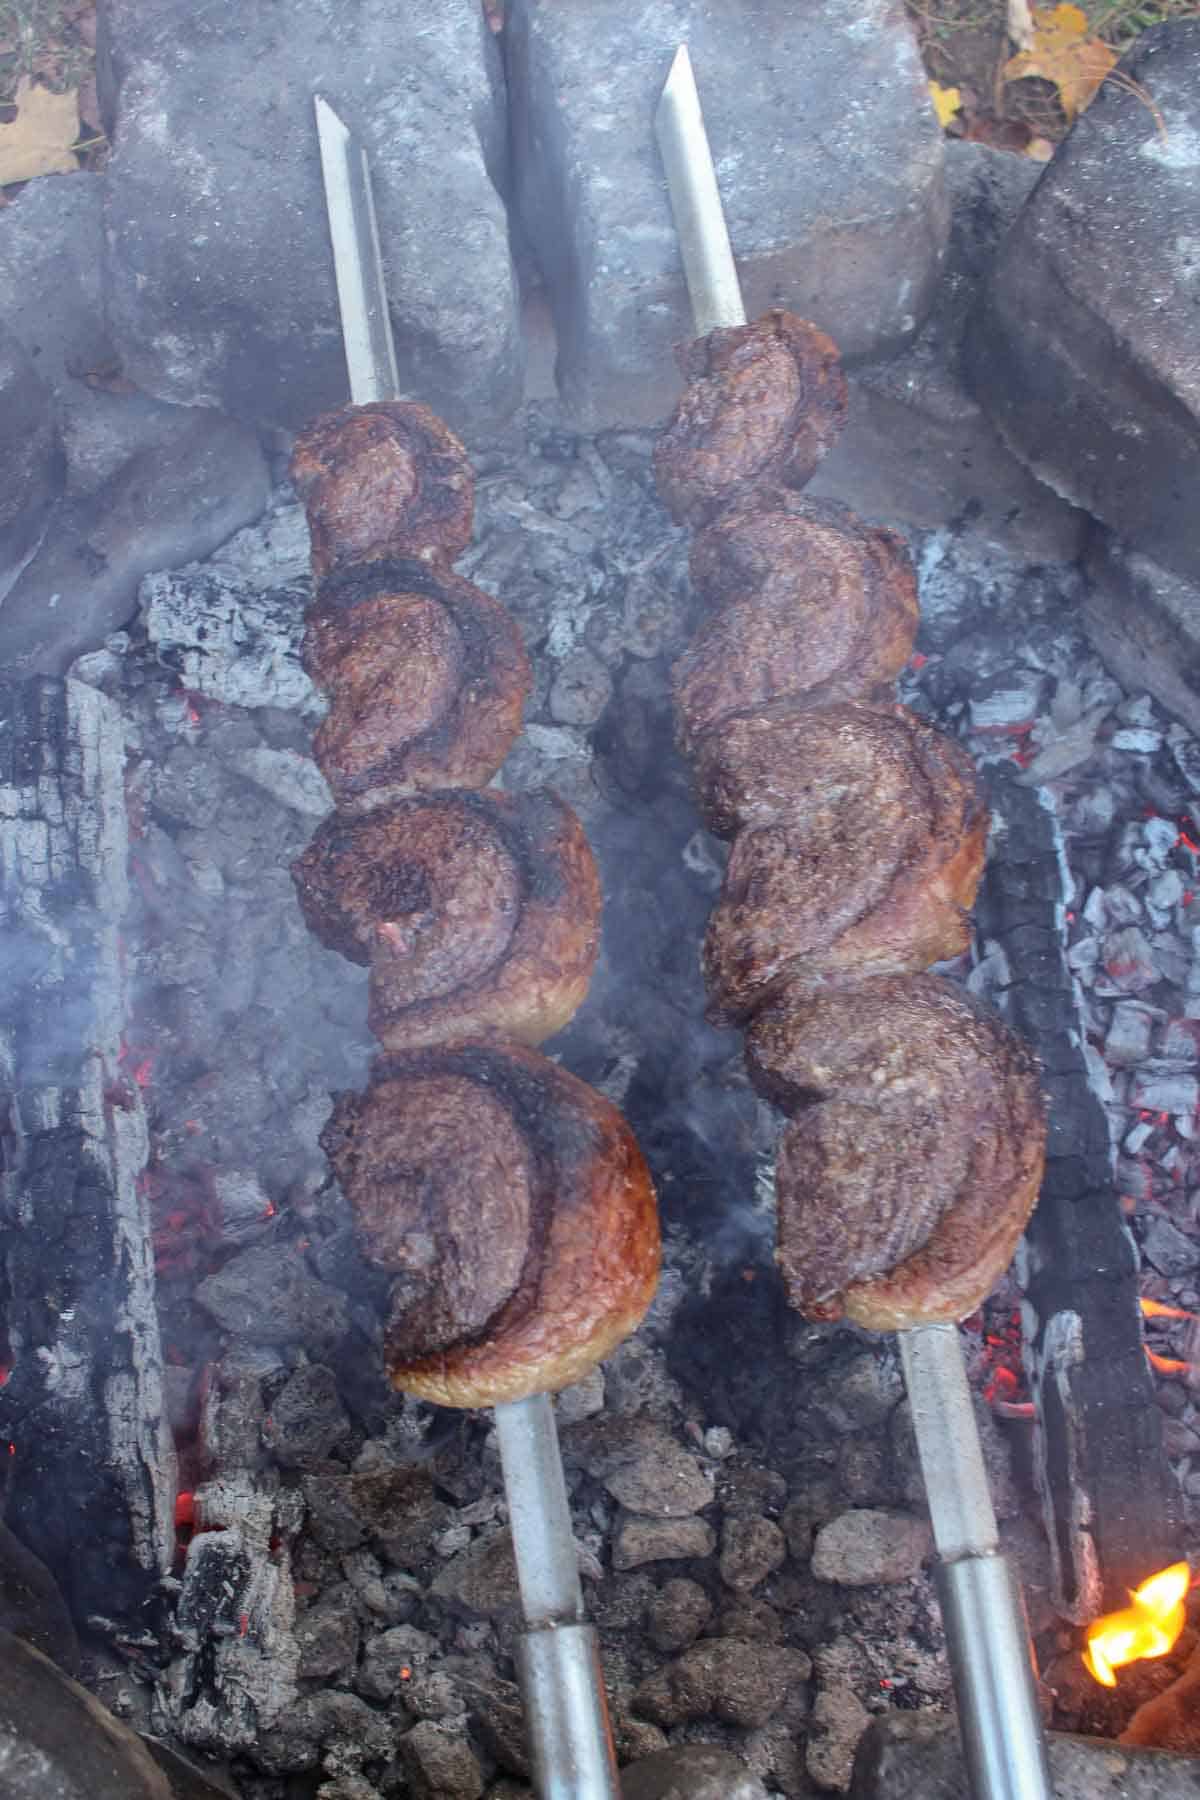 A shot of the skewered picanha cooking over the coals.